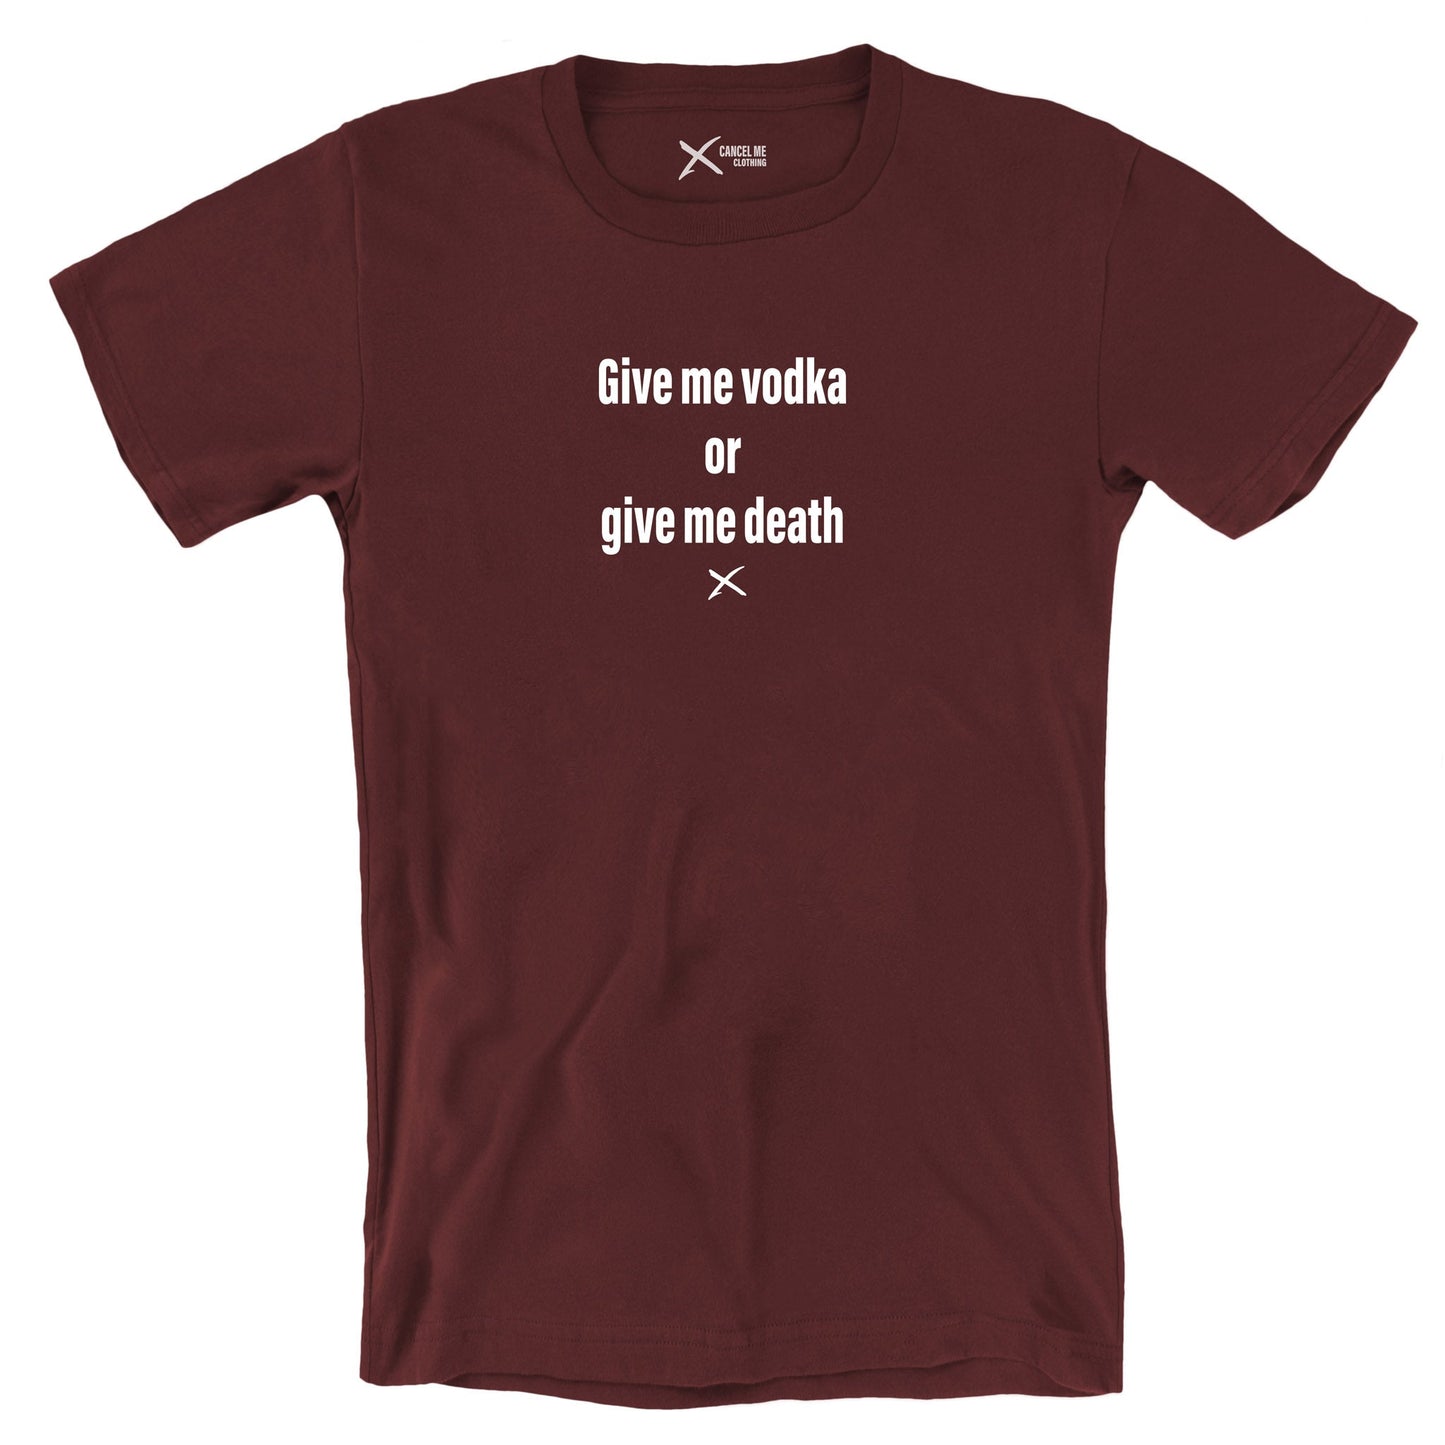 Give me vodka or give me death - Shirt